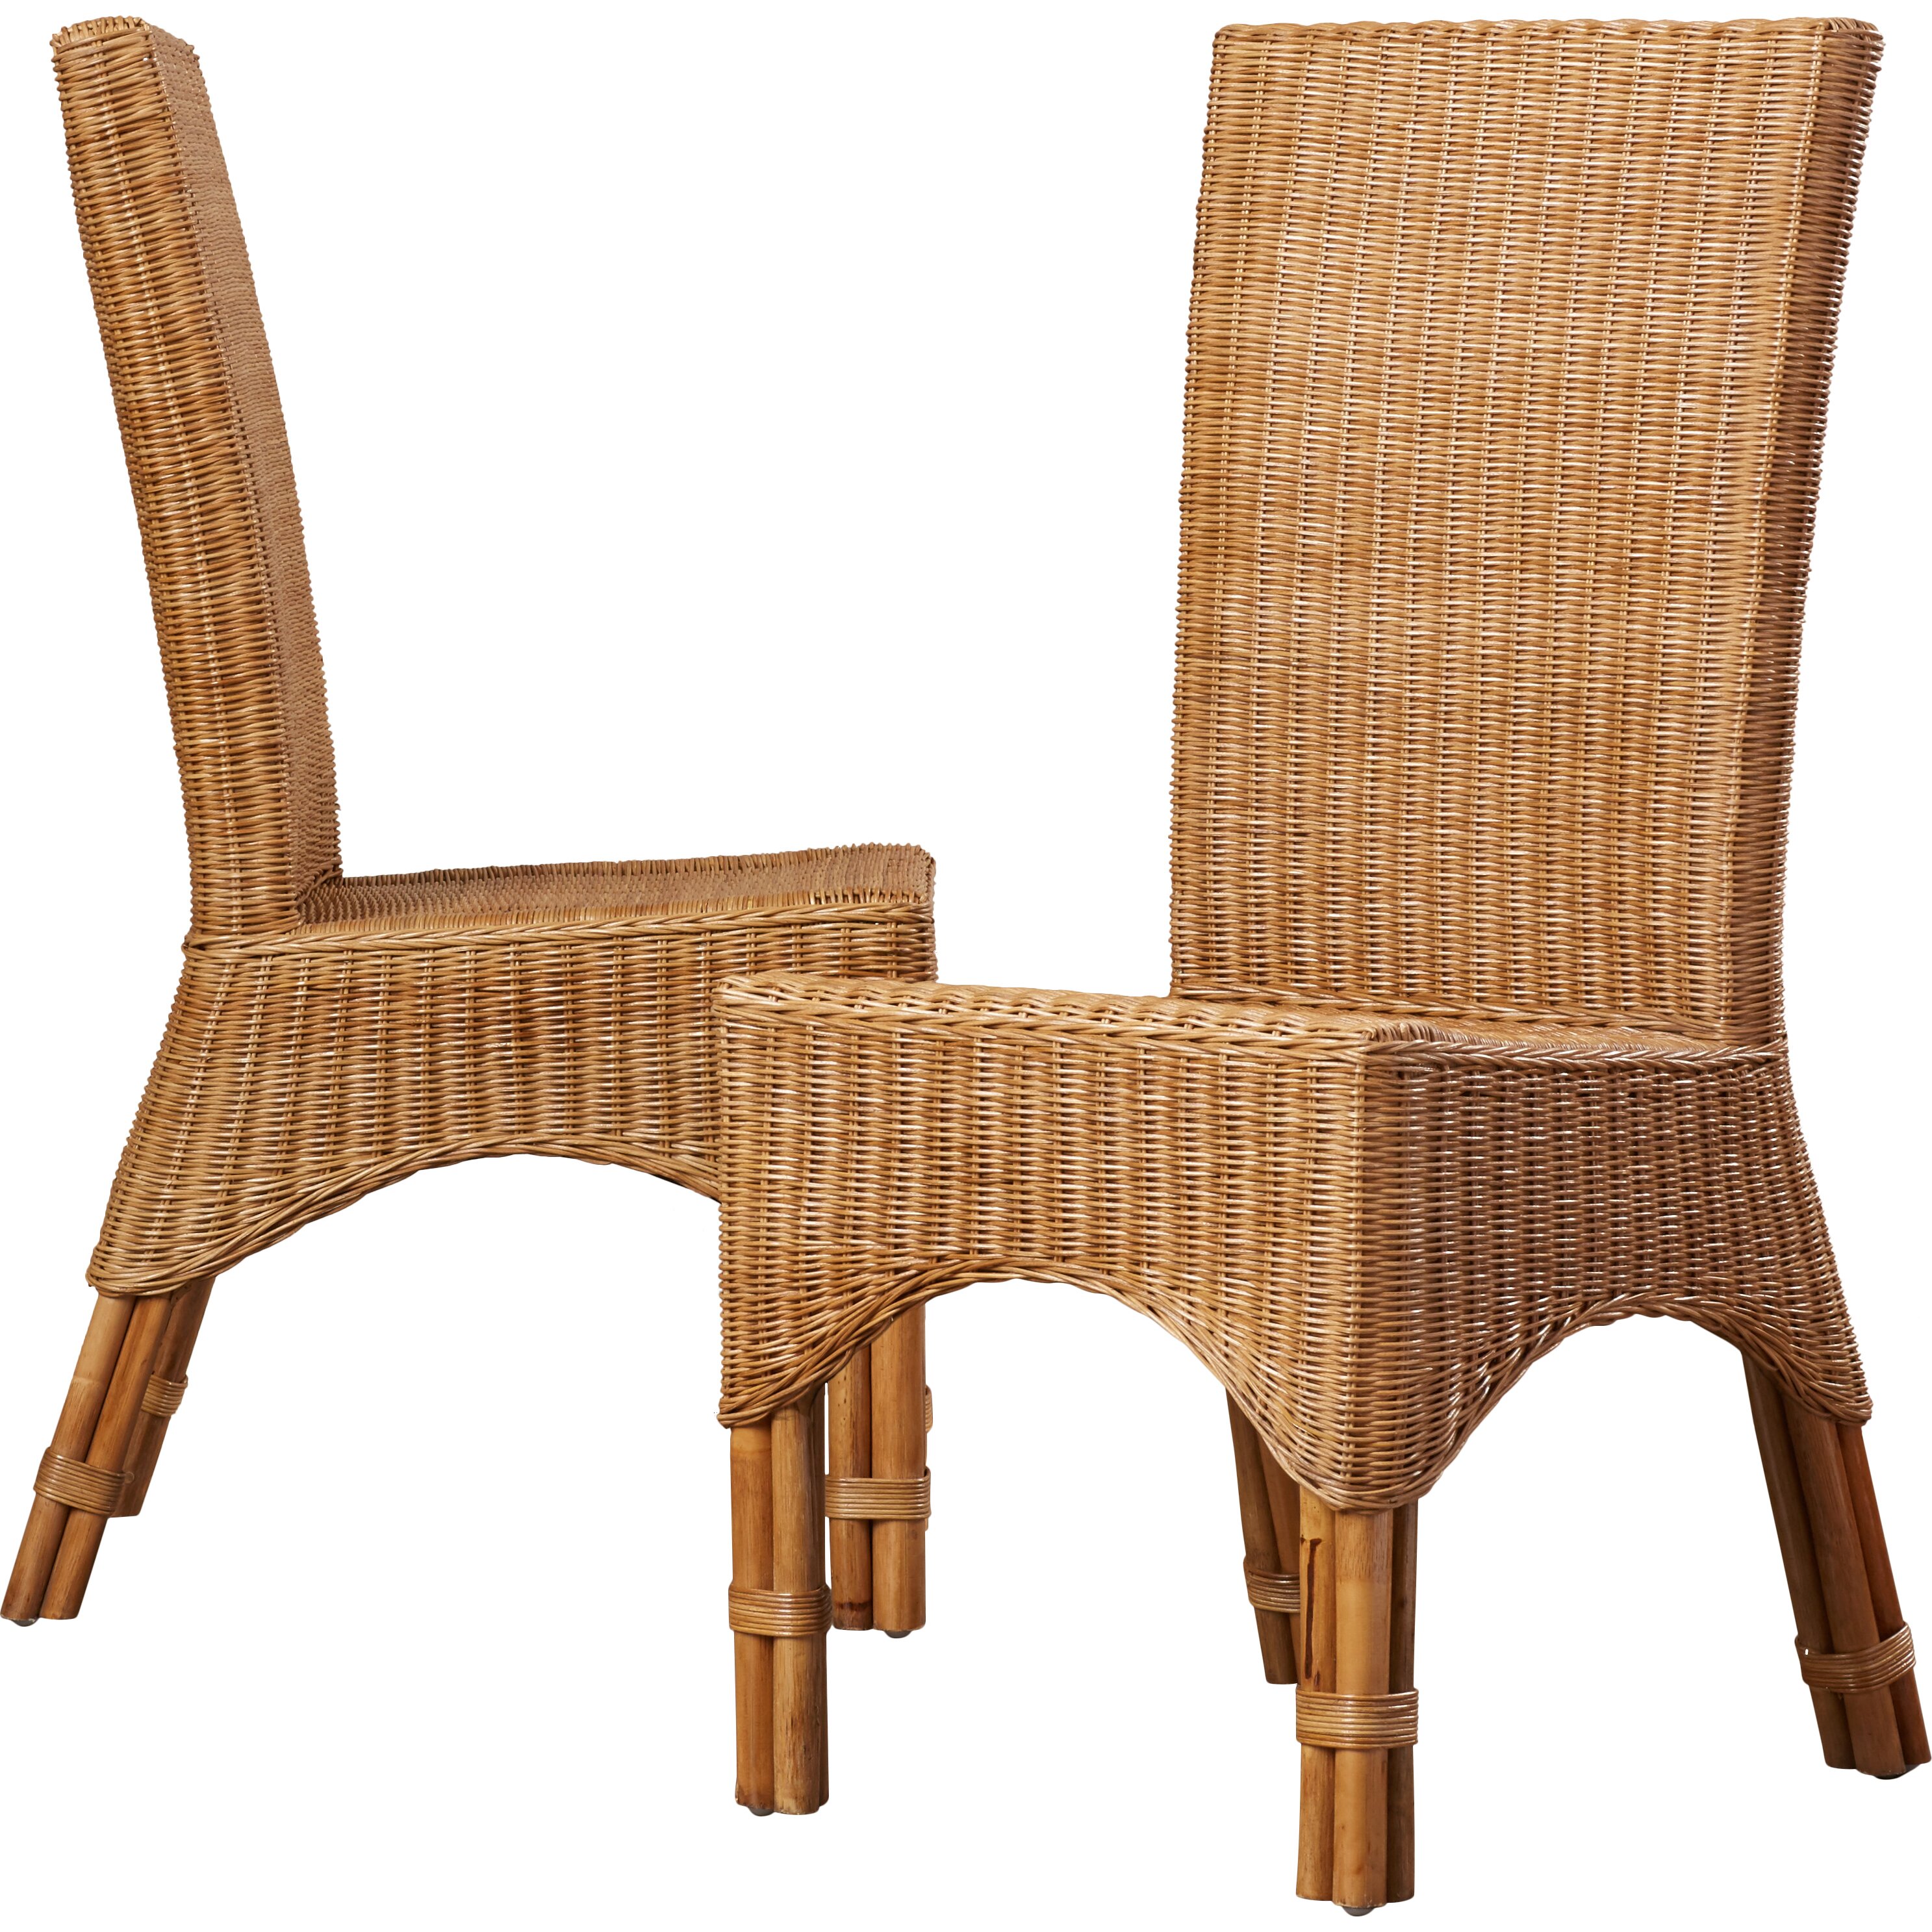 Bay Isle Home Staples Rattan Dining Chair with Rattan Pole Legs